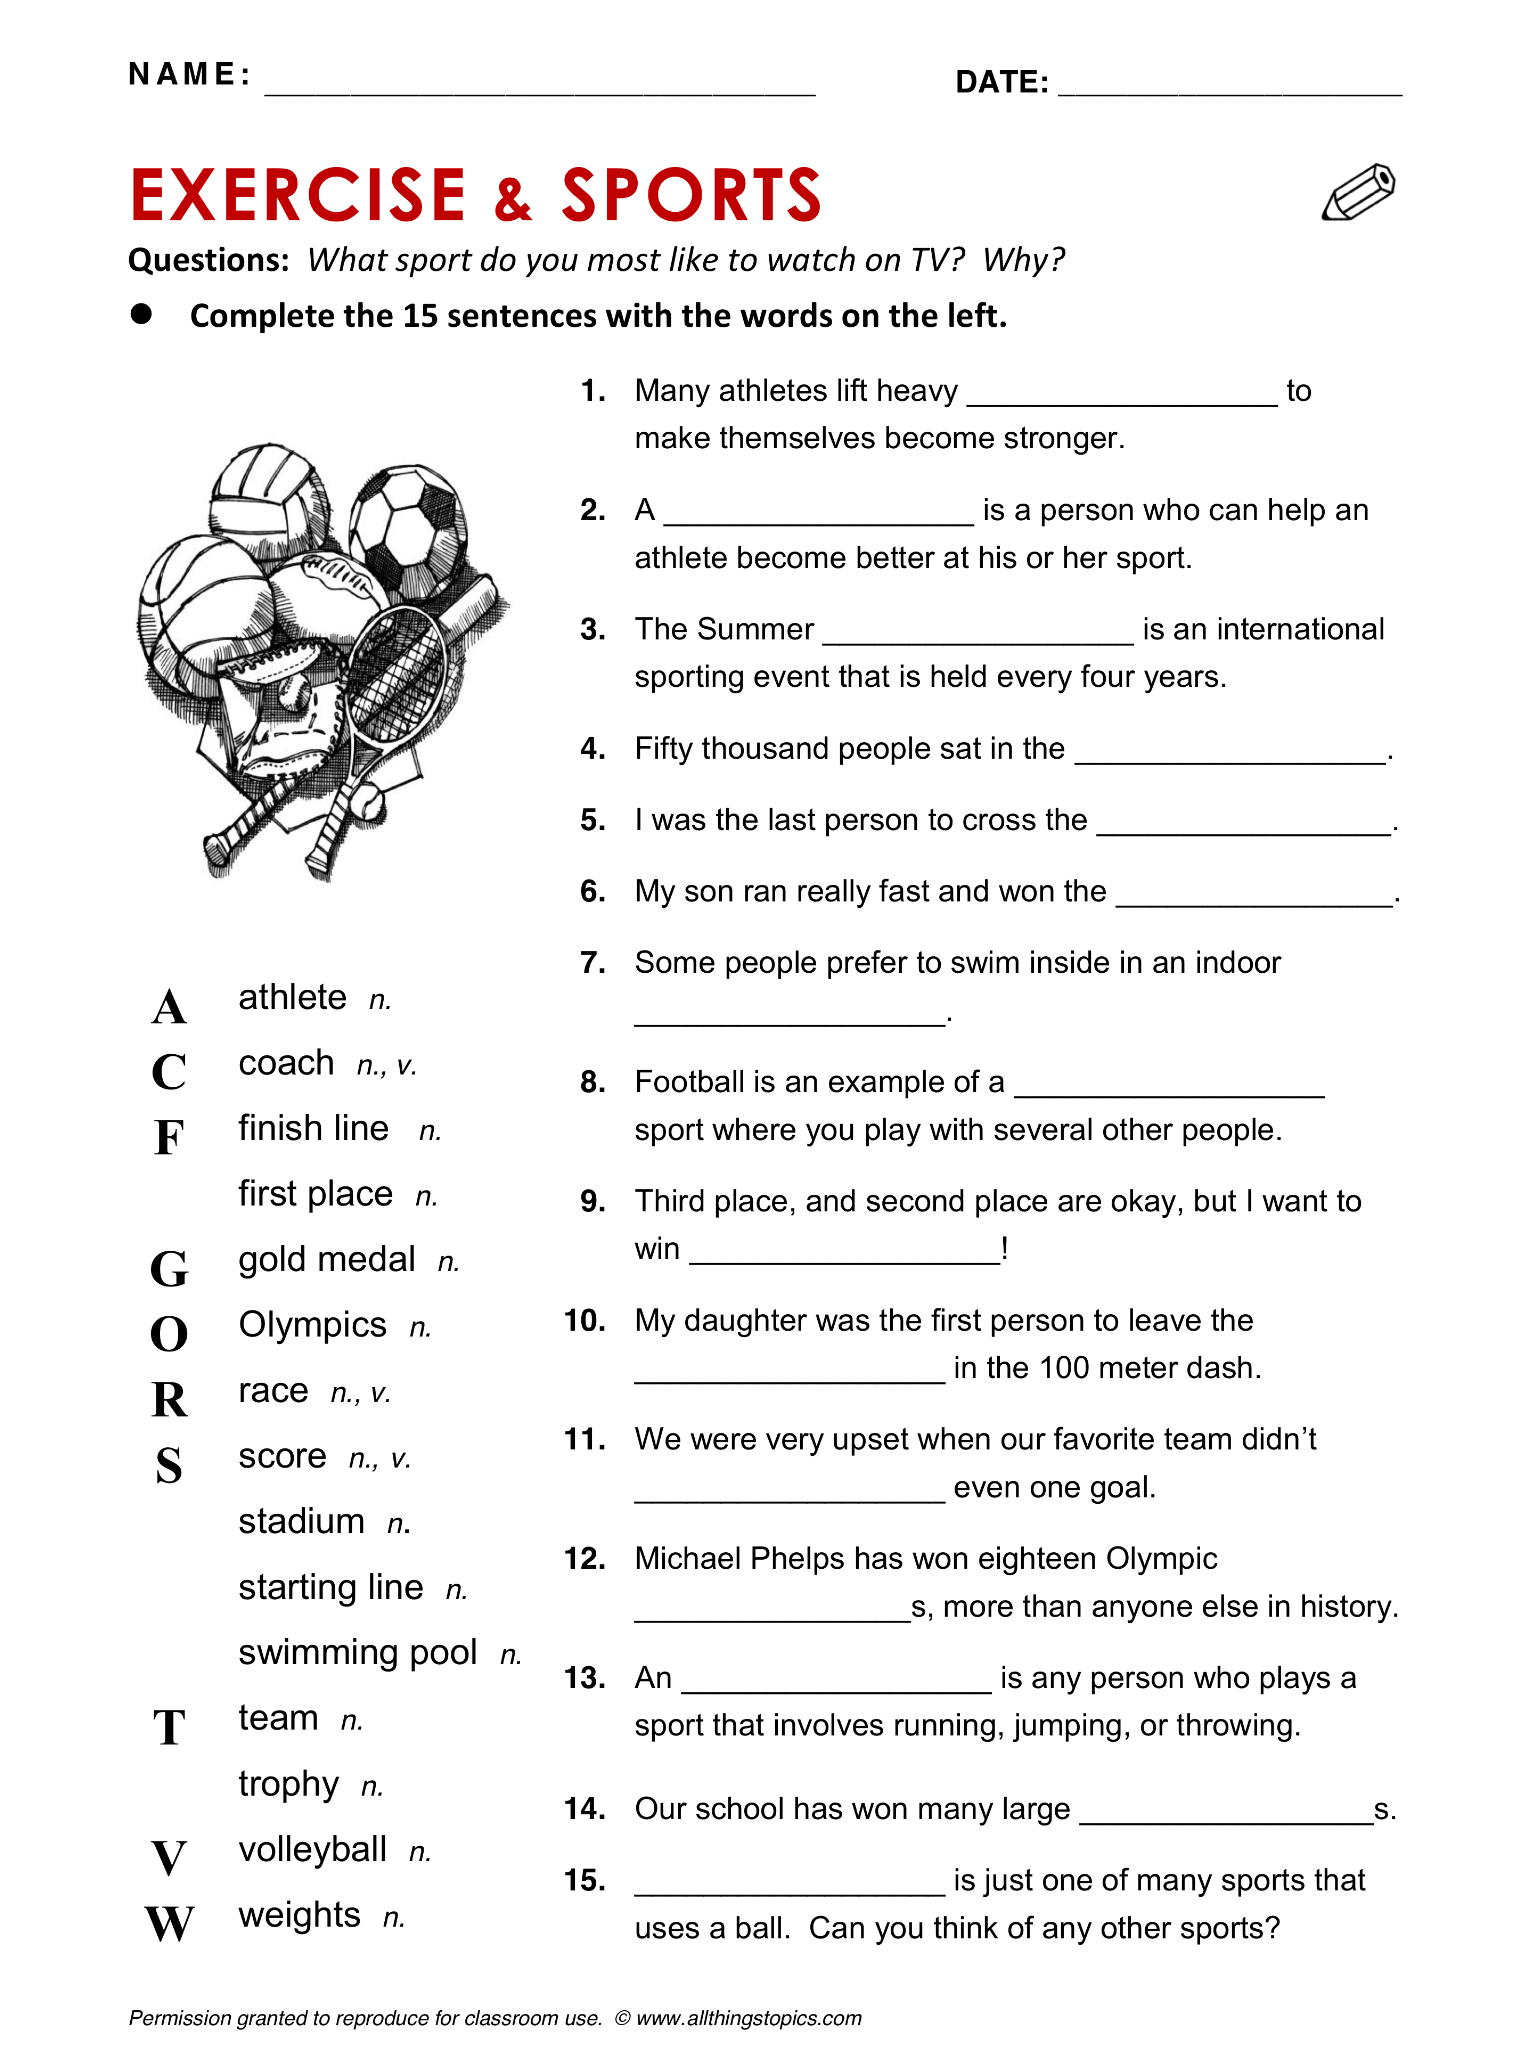 English vocabulary exercise. Sport and exercise английский. Sport Vocabulary exercises. Sport Worksheets. Vocabulary exercises in English.